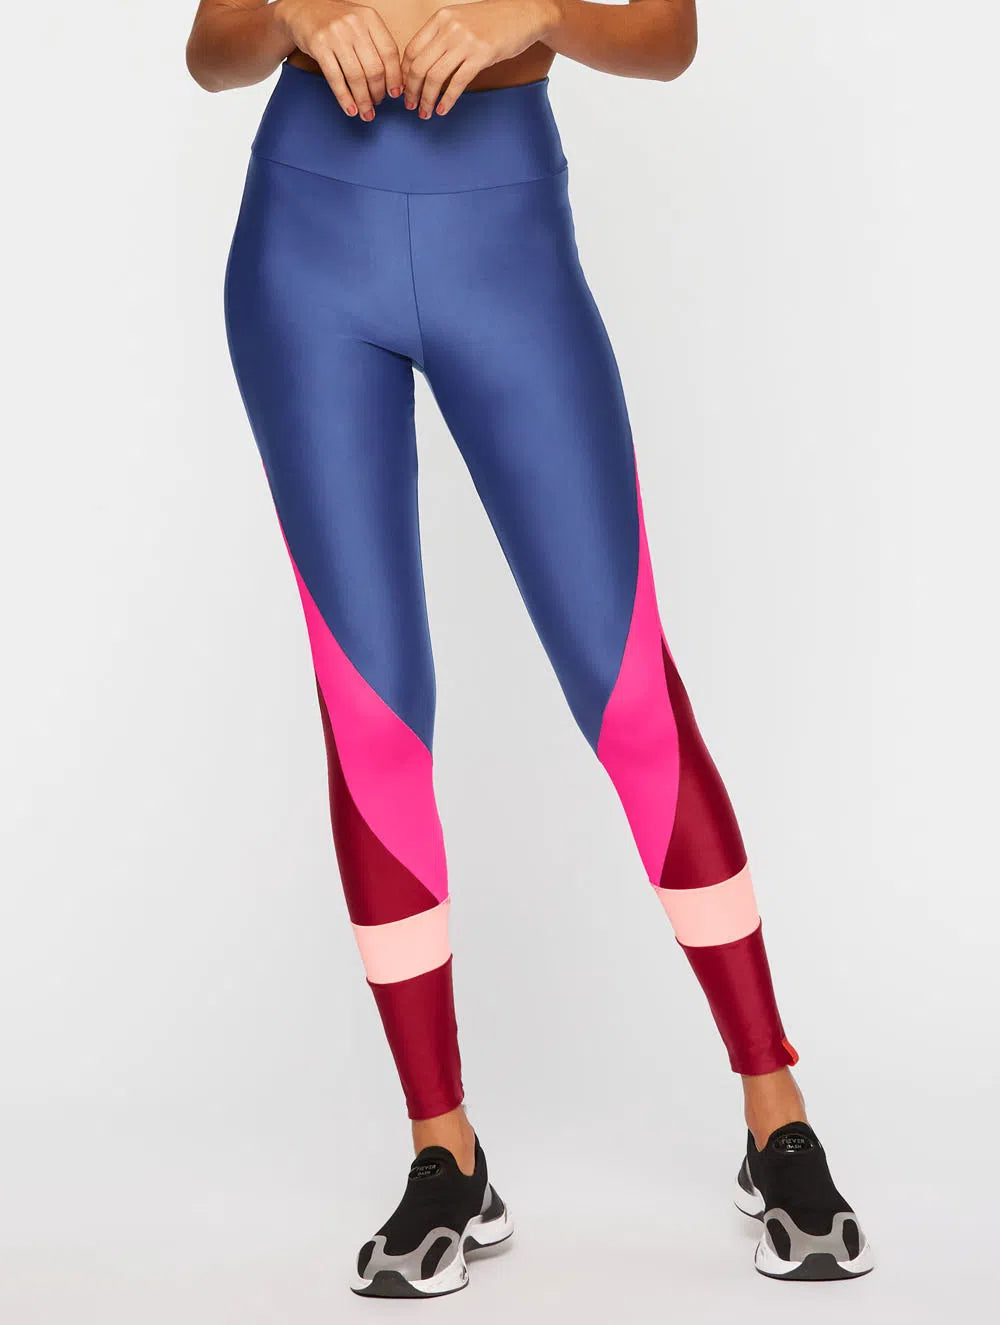 Leggings Player Body For Sure – Mineral Fashion Store